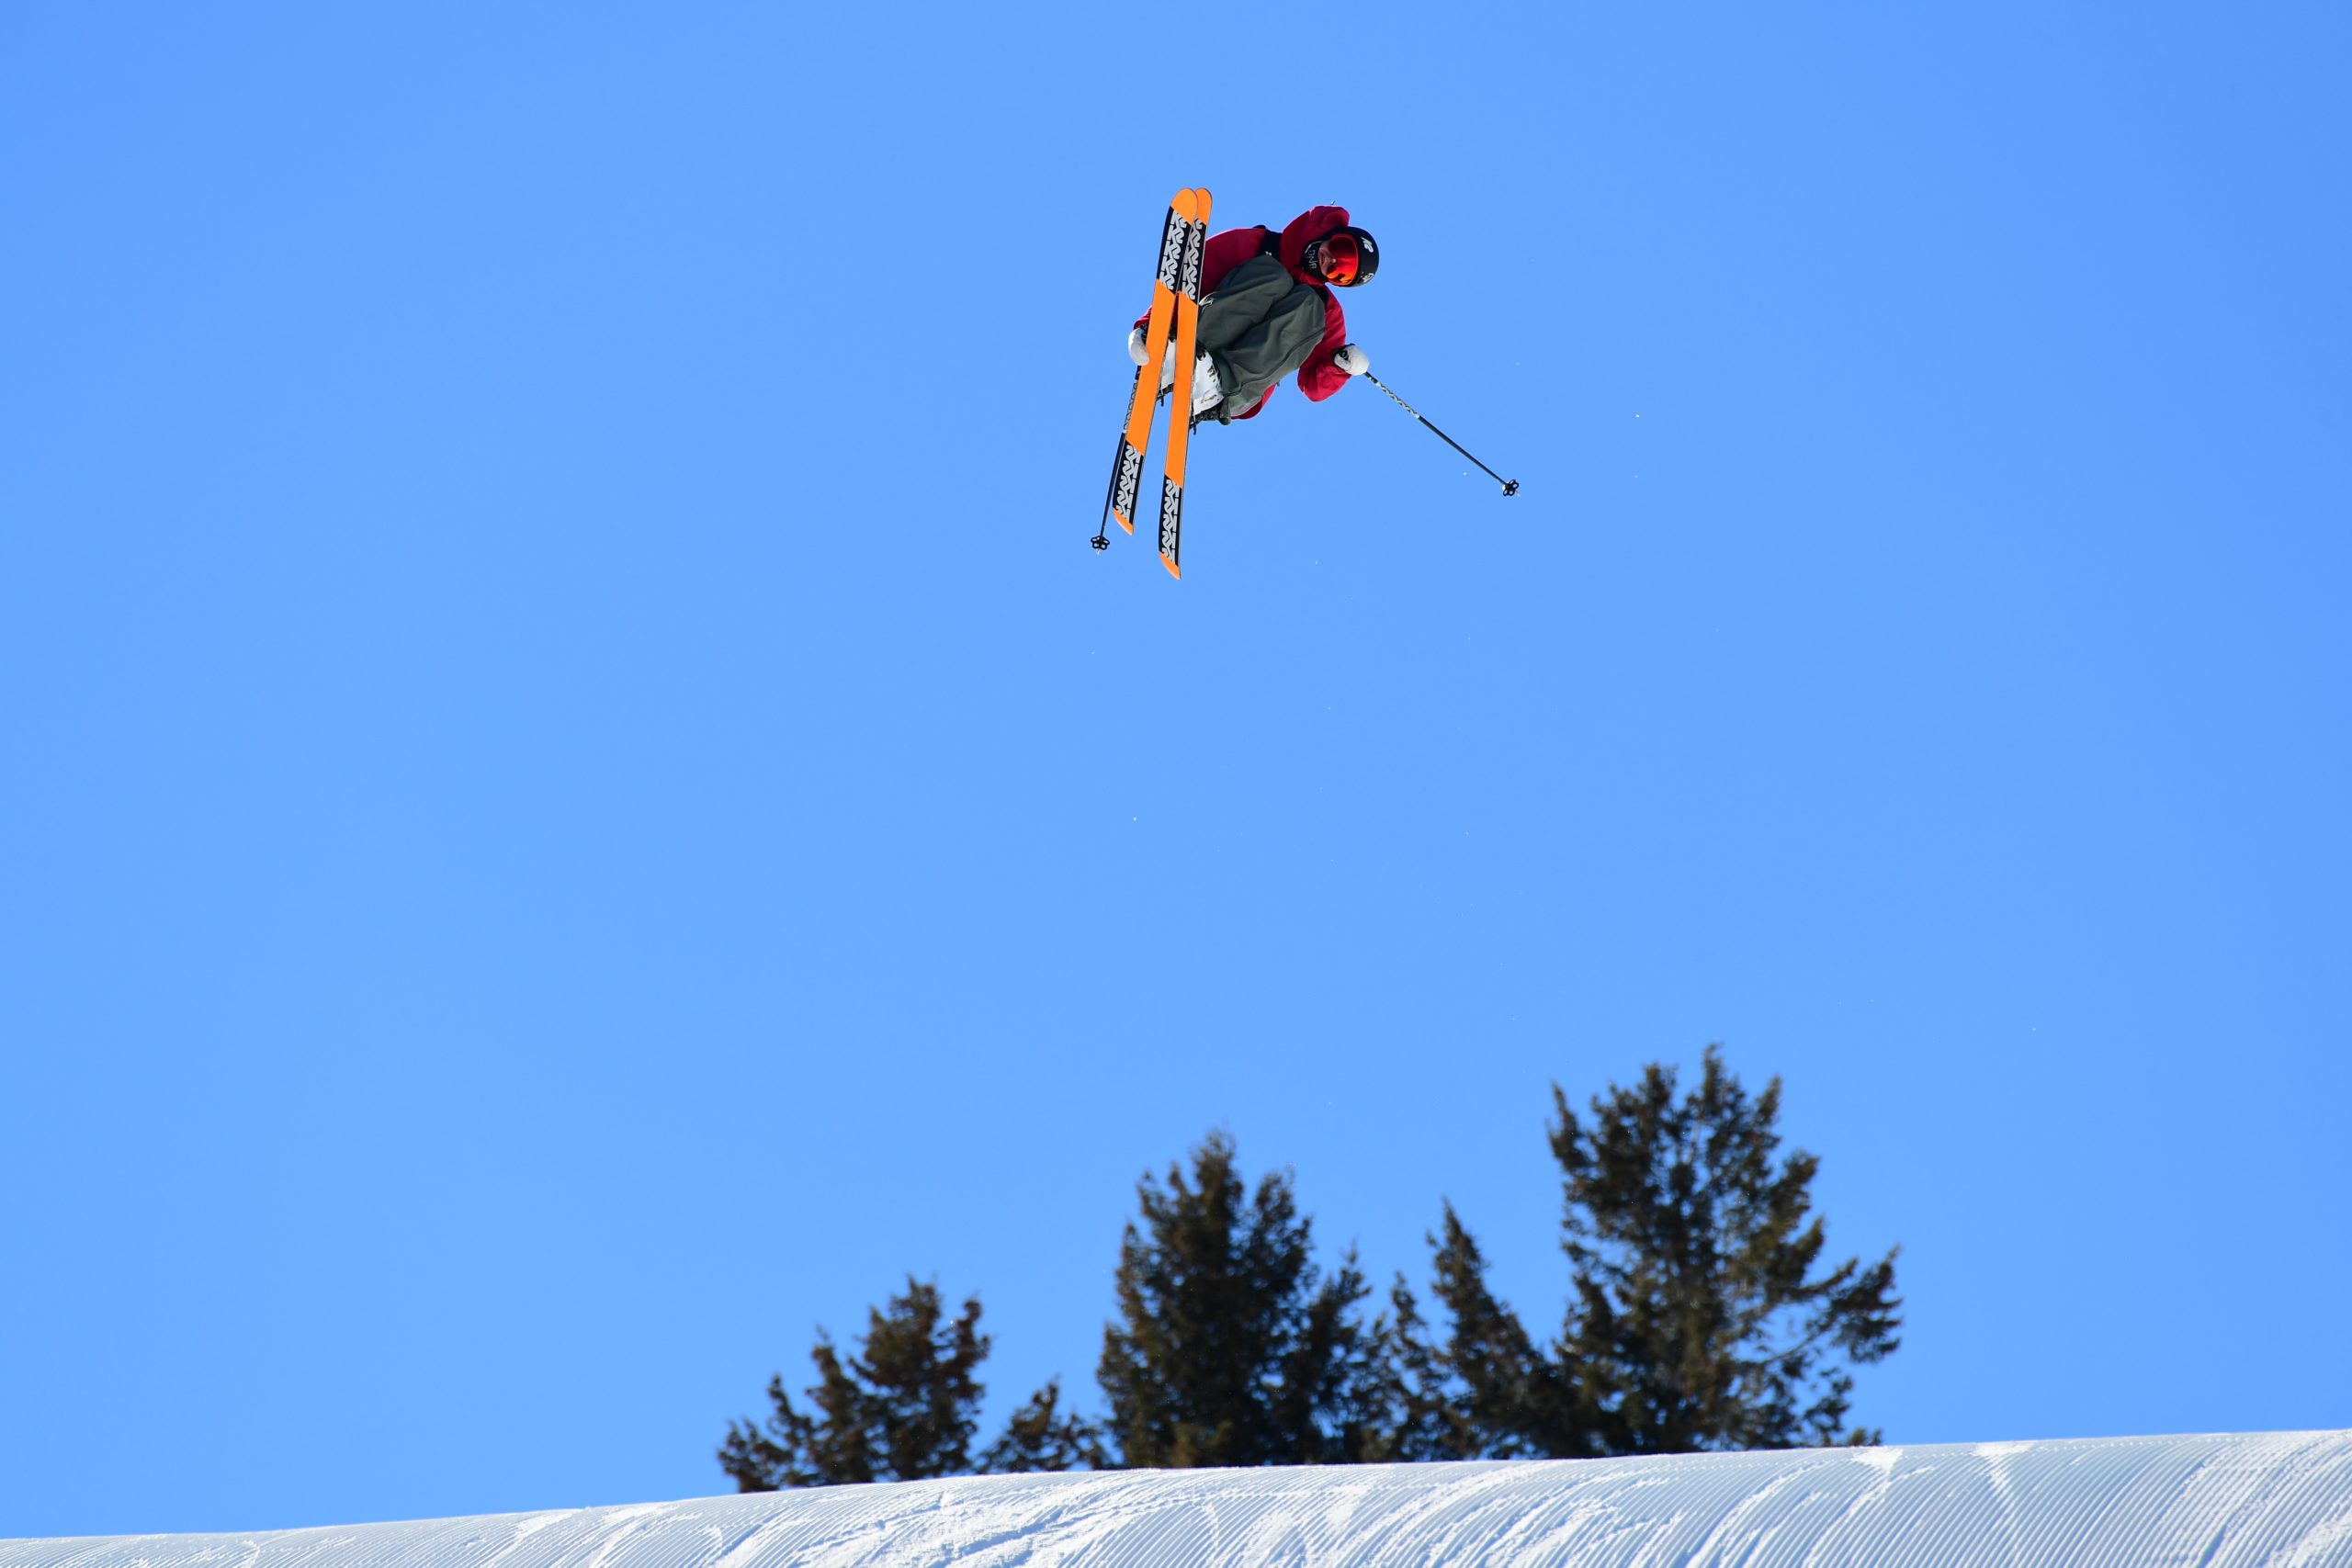 Christian Nummedal competes at the 2022 Winter X Games Men's Ski Slopestyle